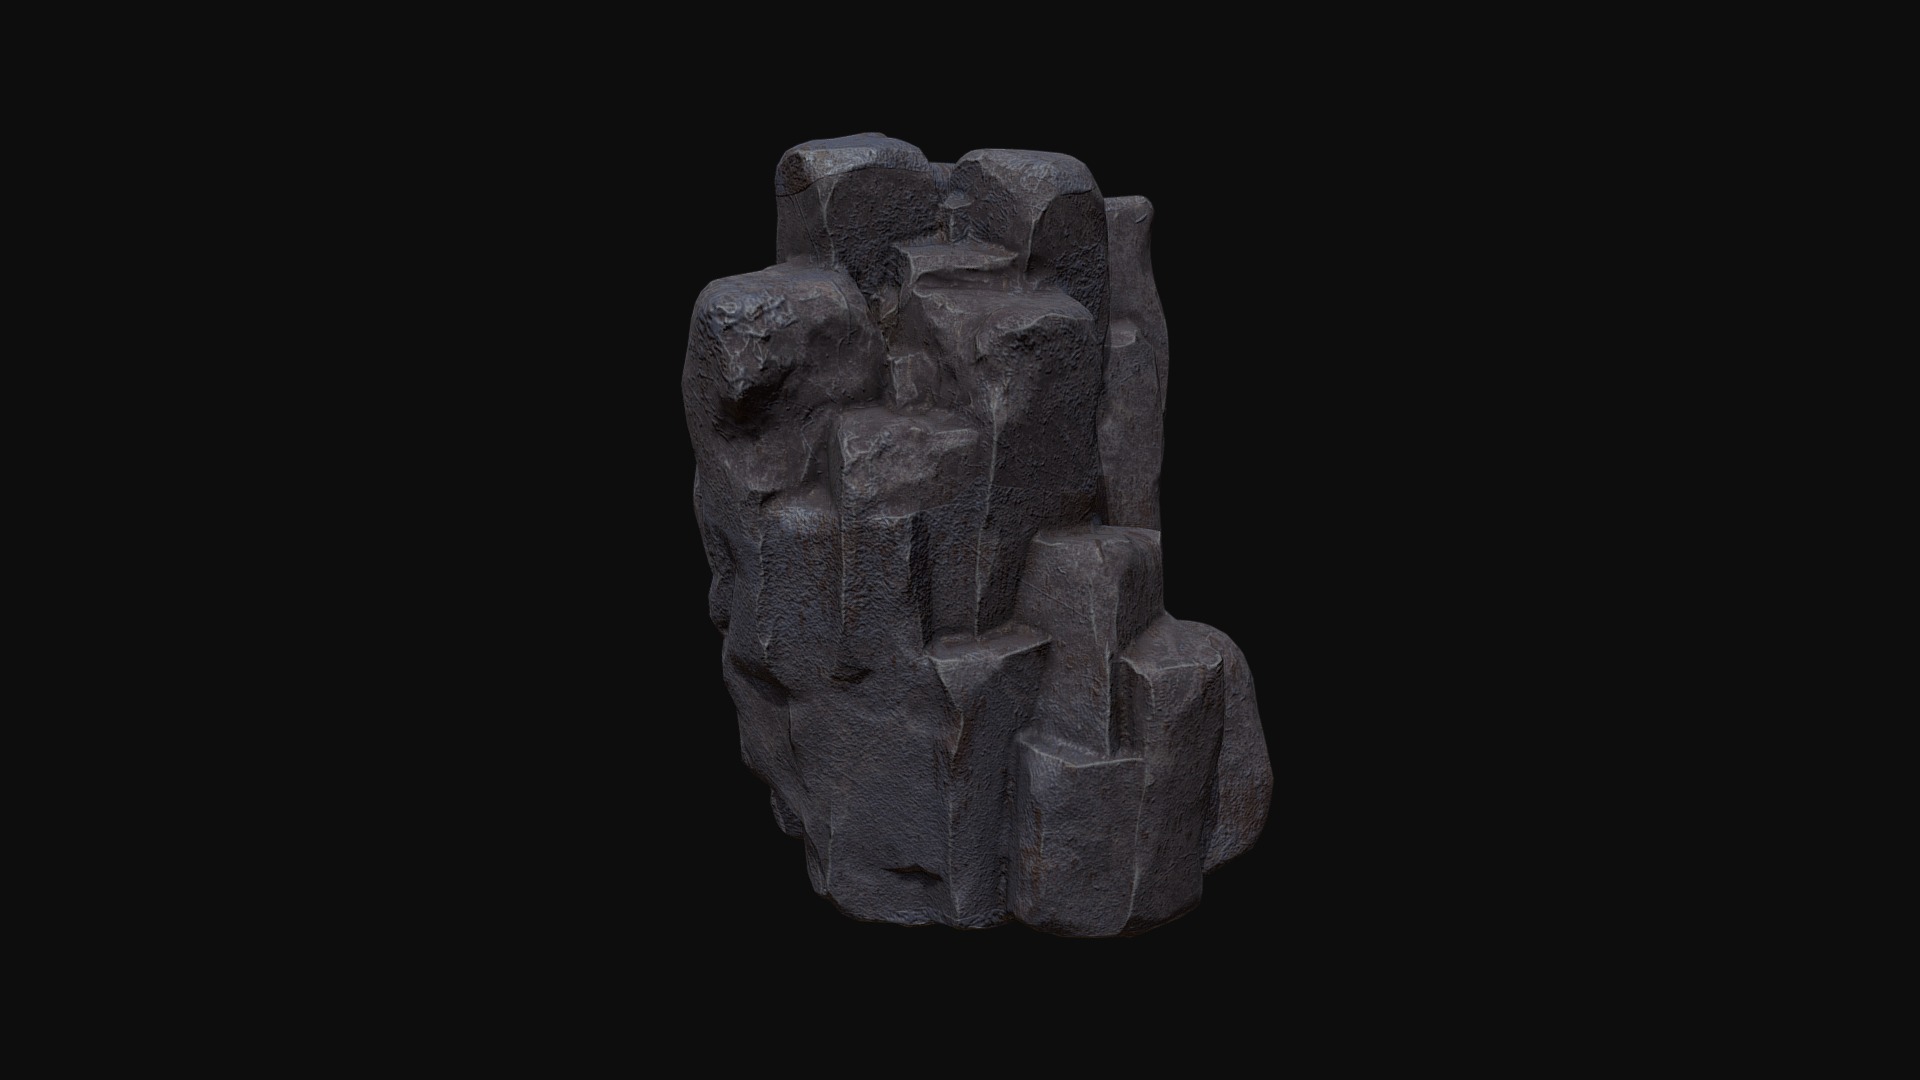 3D model Low poly sci fi column grey rock - This is a 3D model of the Low poly sci fi column grey rock. The 3D model is about a stone sculpture of a person.